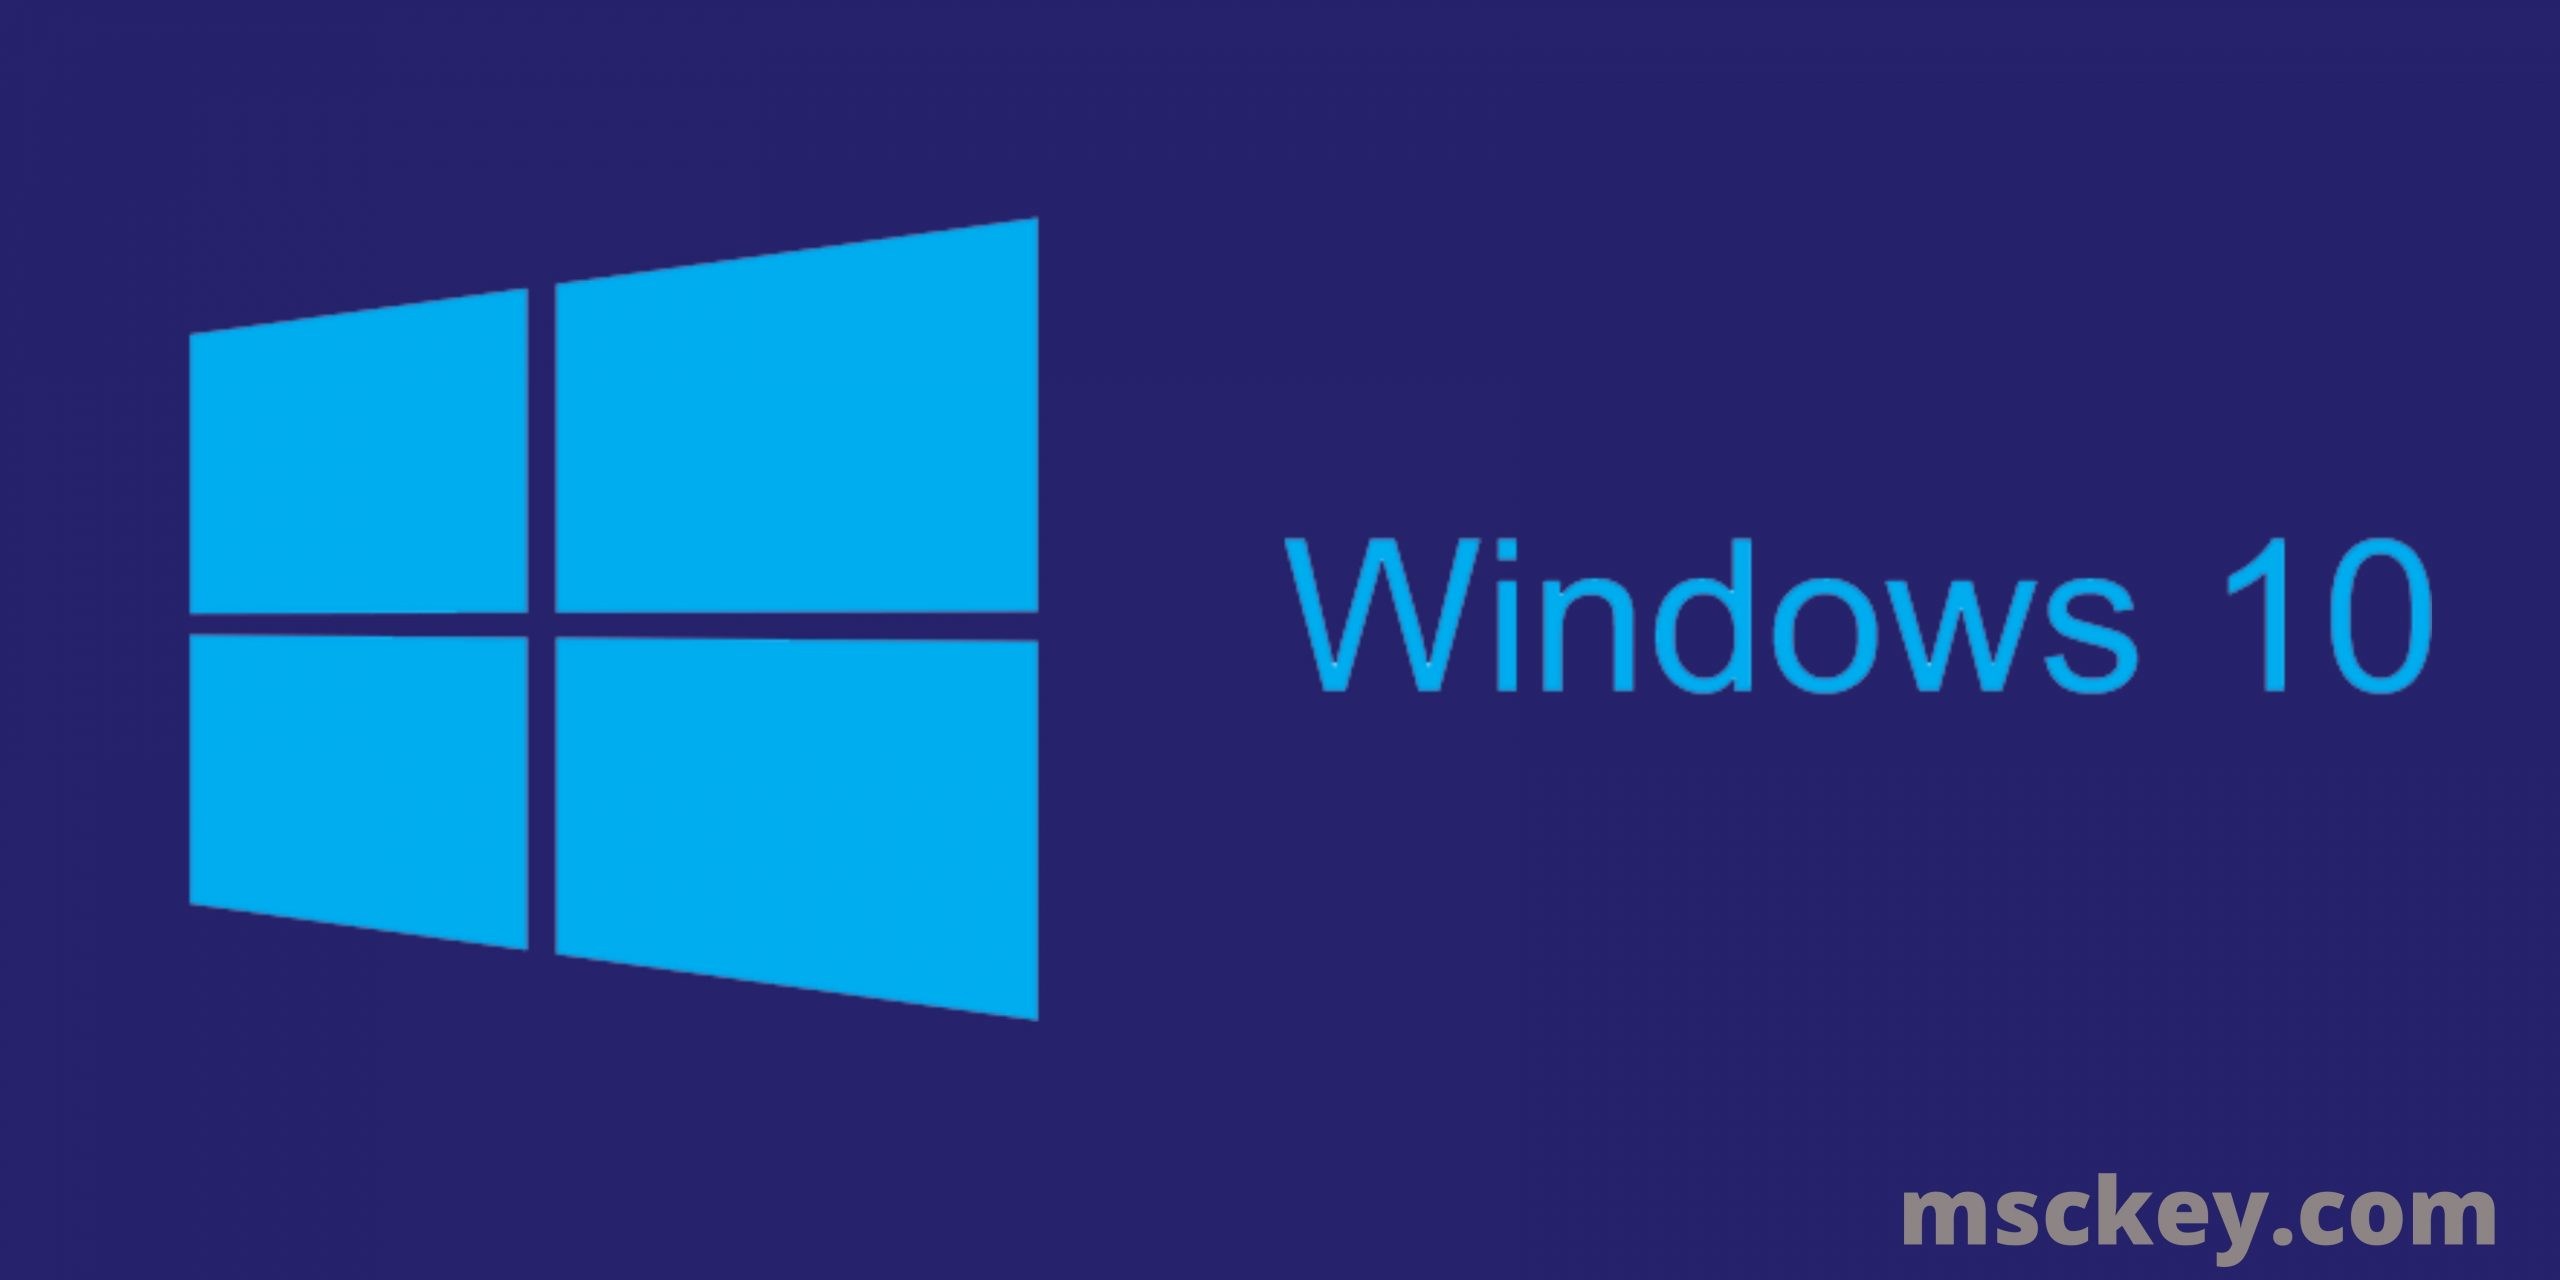 What is Windows 10 Professional